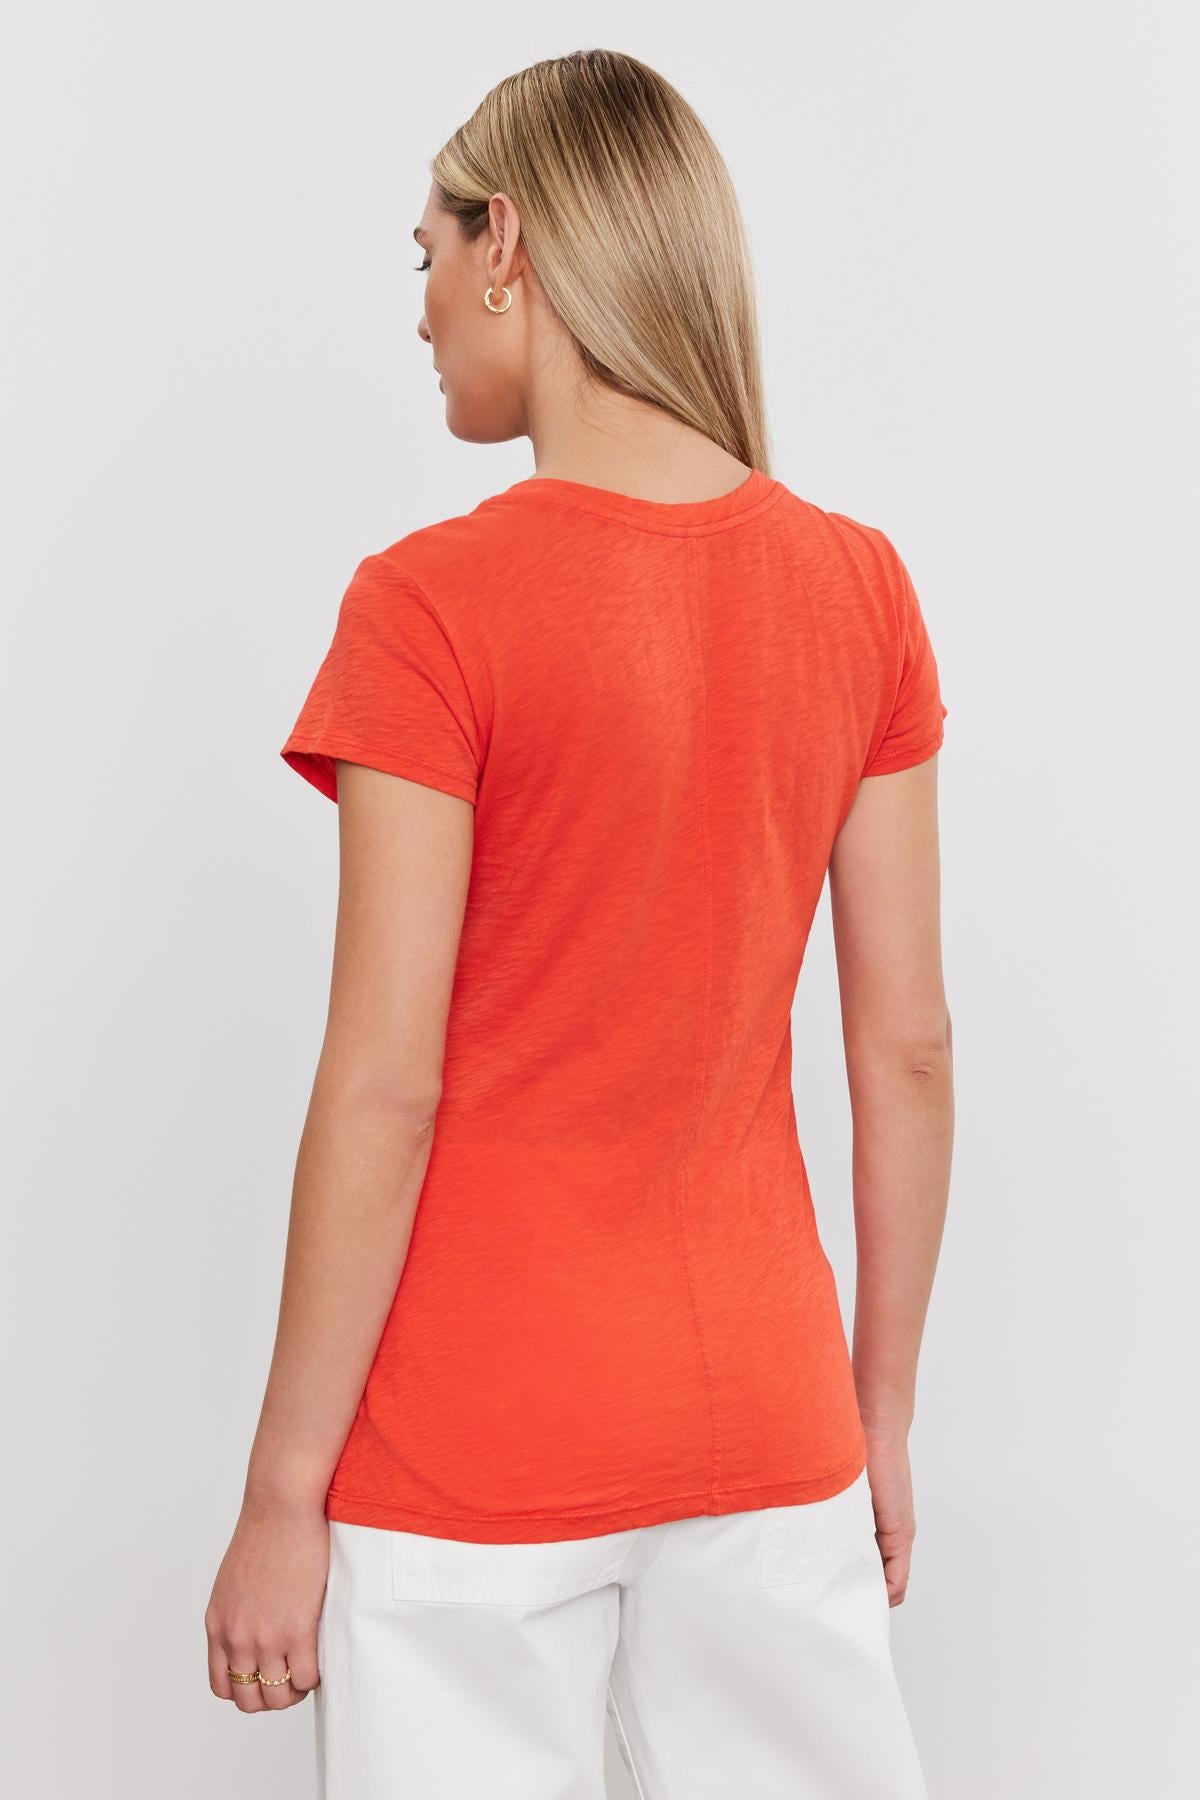 Woman in a bright orange ODELIA COTTON SLUB CREW NECK TEE by Velvet by Graham & Spencer and white pants, viewed from the back. Her hair is styled in a ponytail.-36910072496321